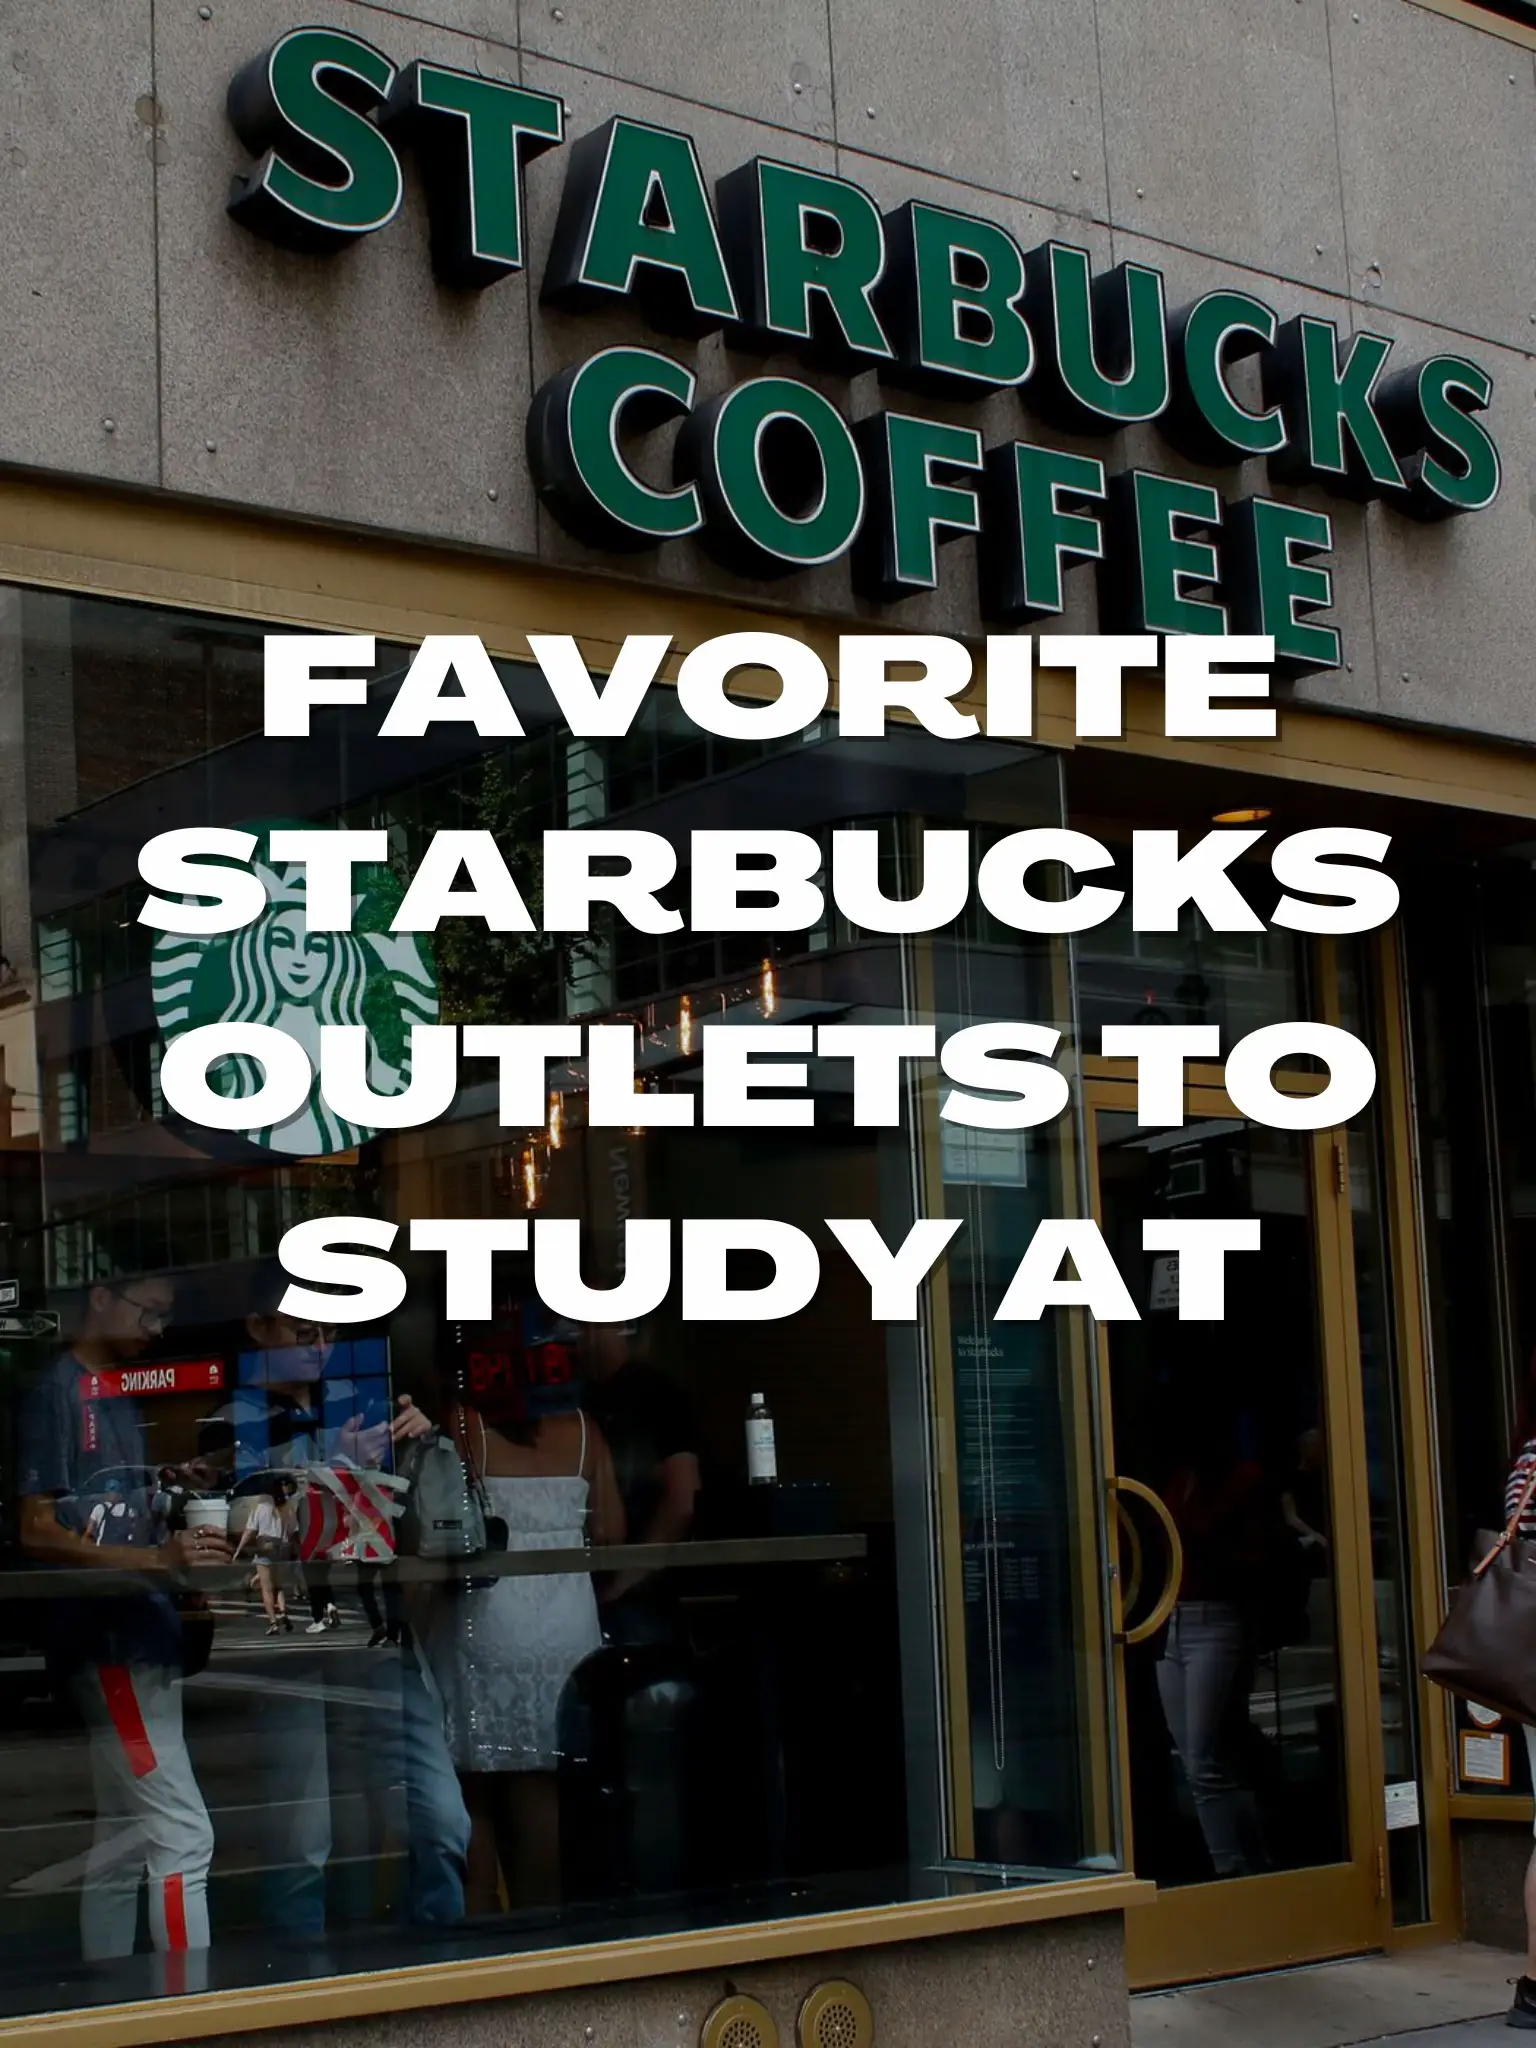 starbucks outlets i love to study at📖💭's images(0)